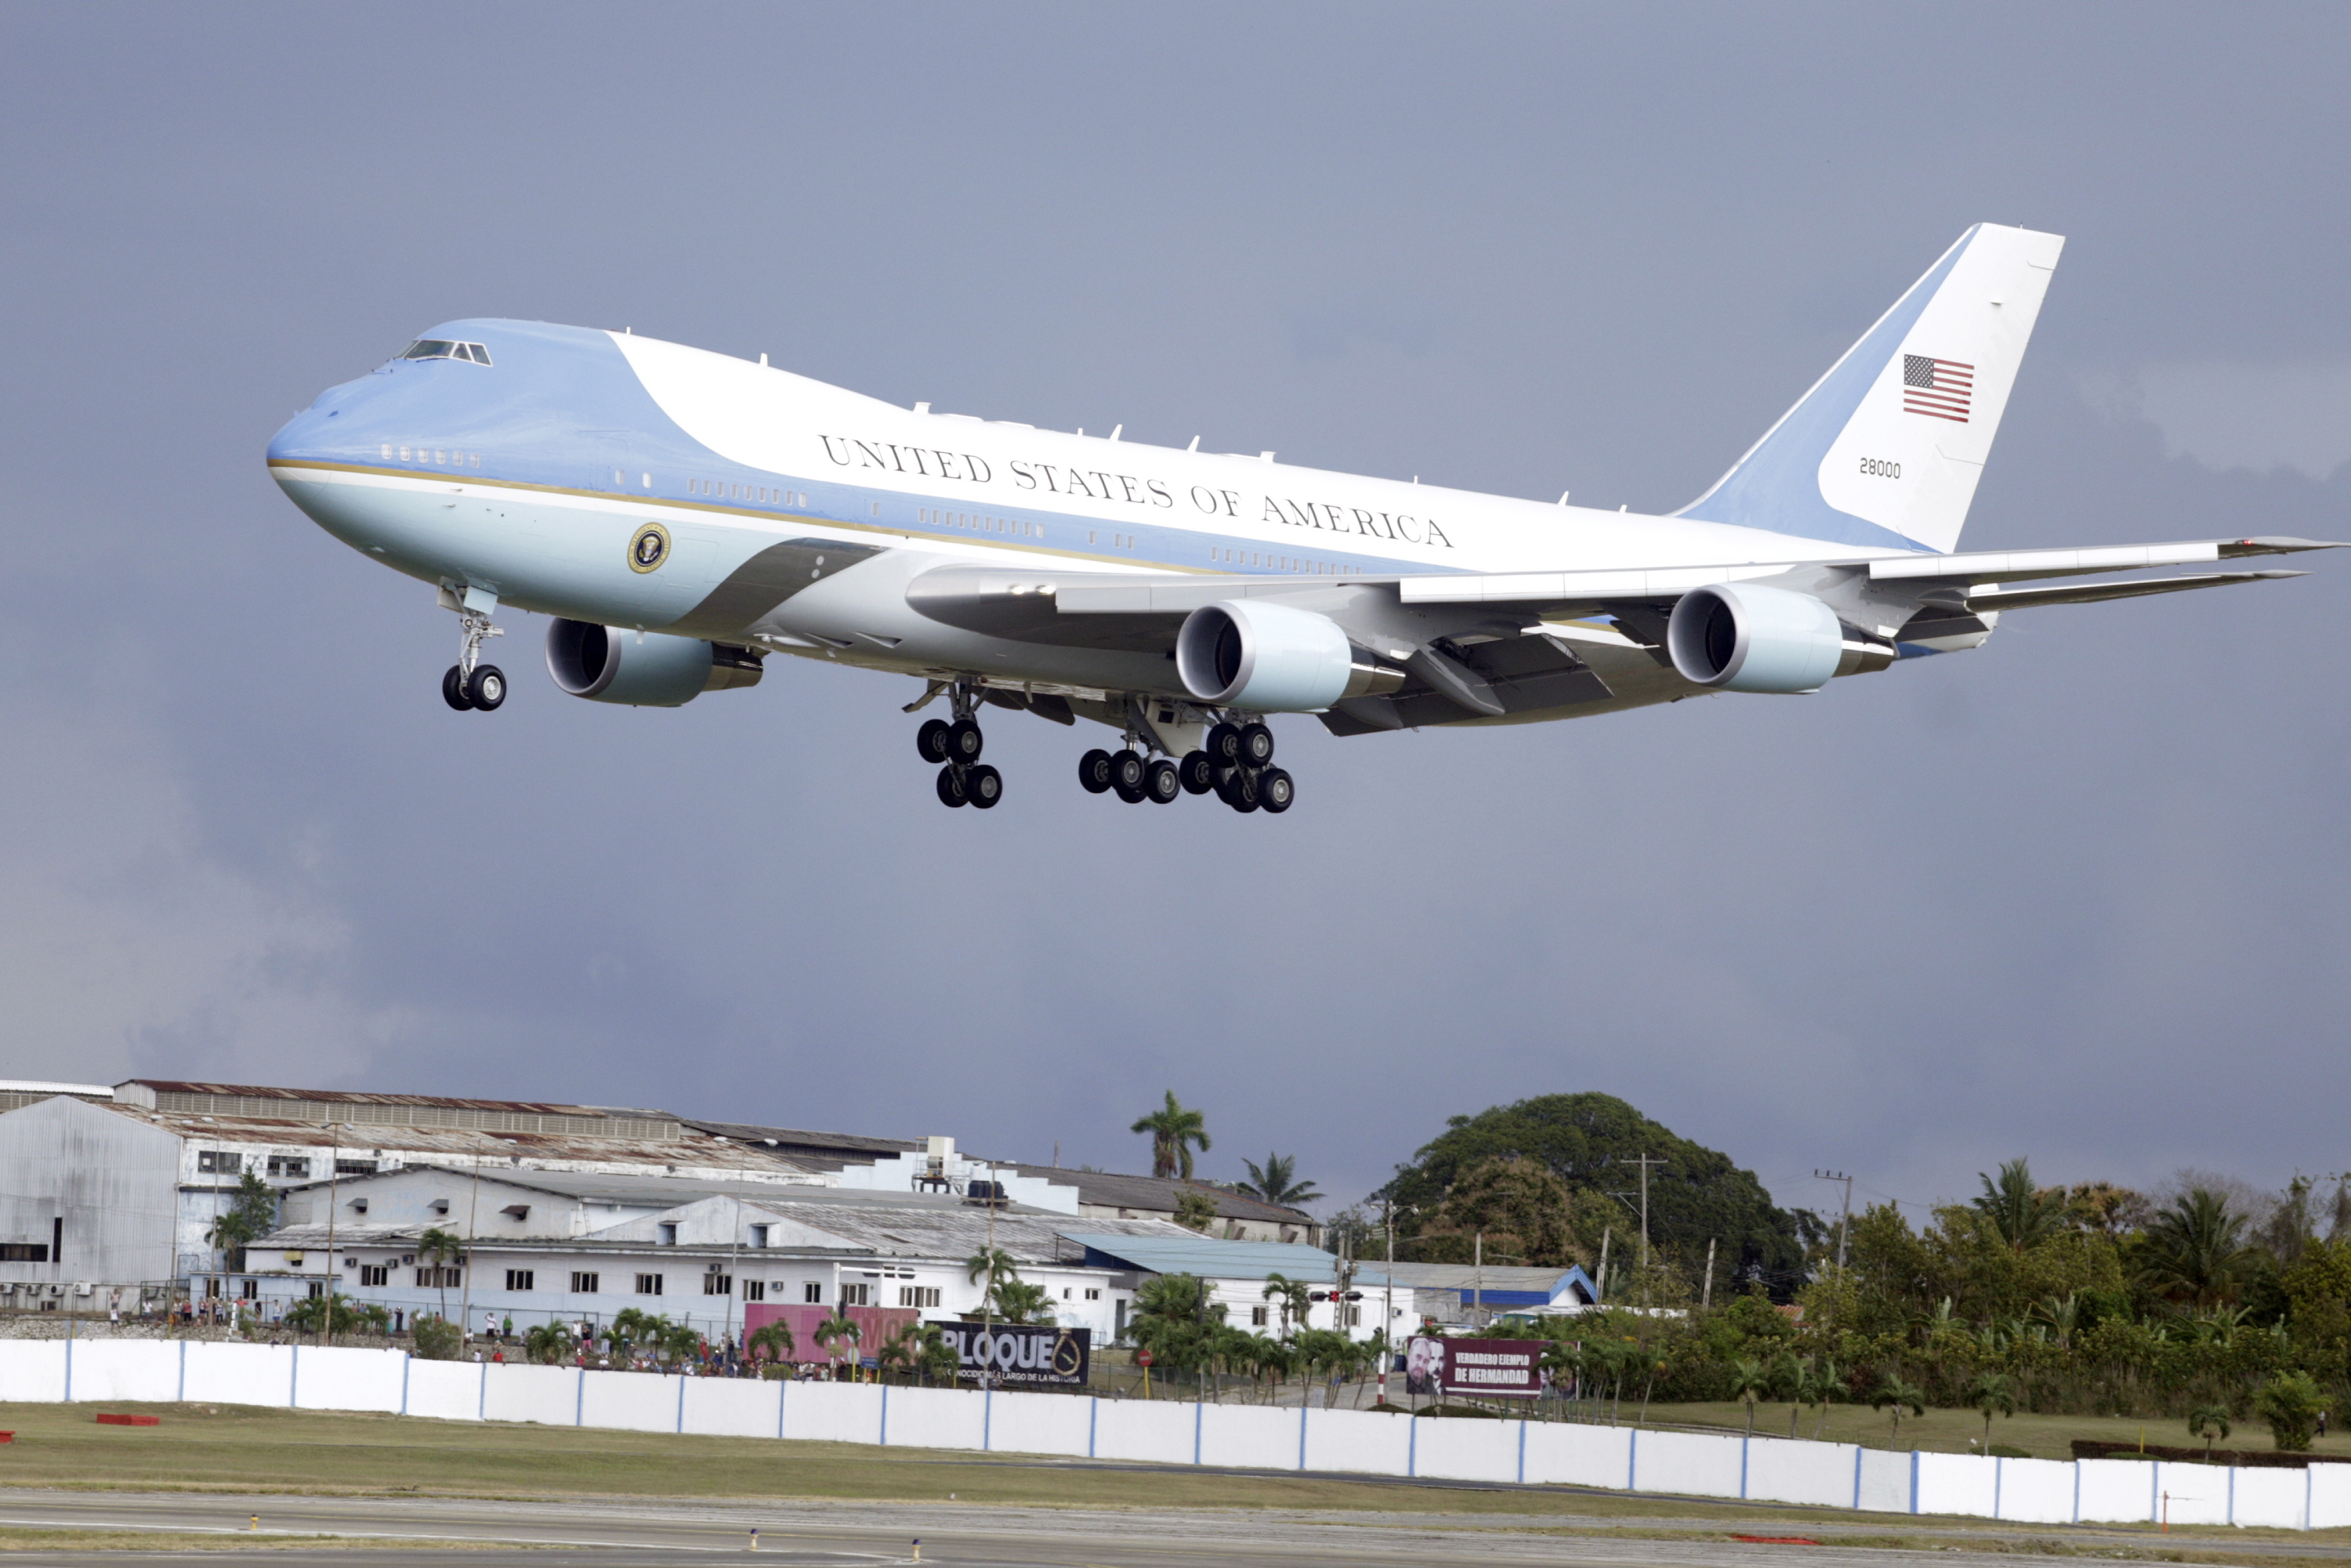 President Obama Arrives In Cuba For Historic Visit To Island